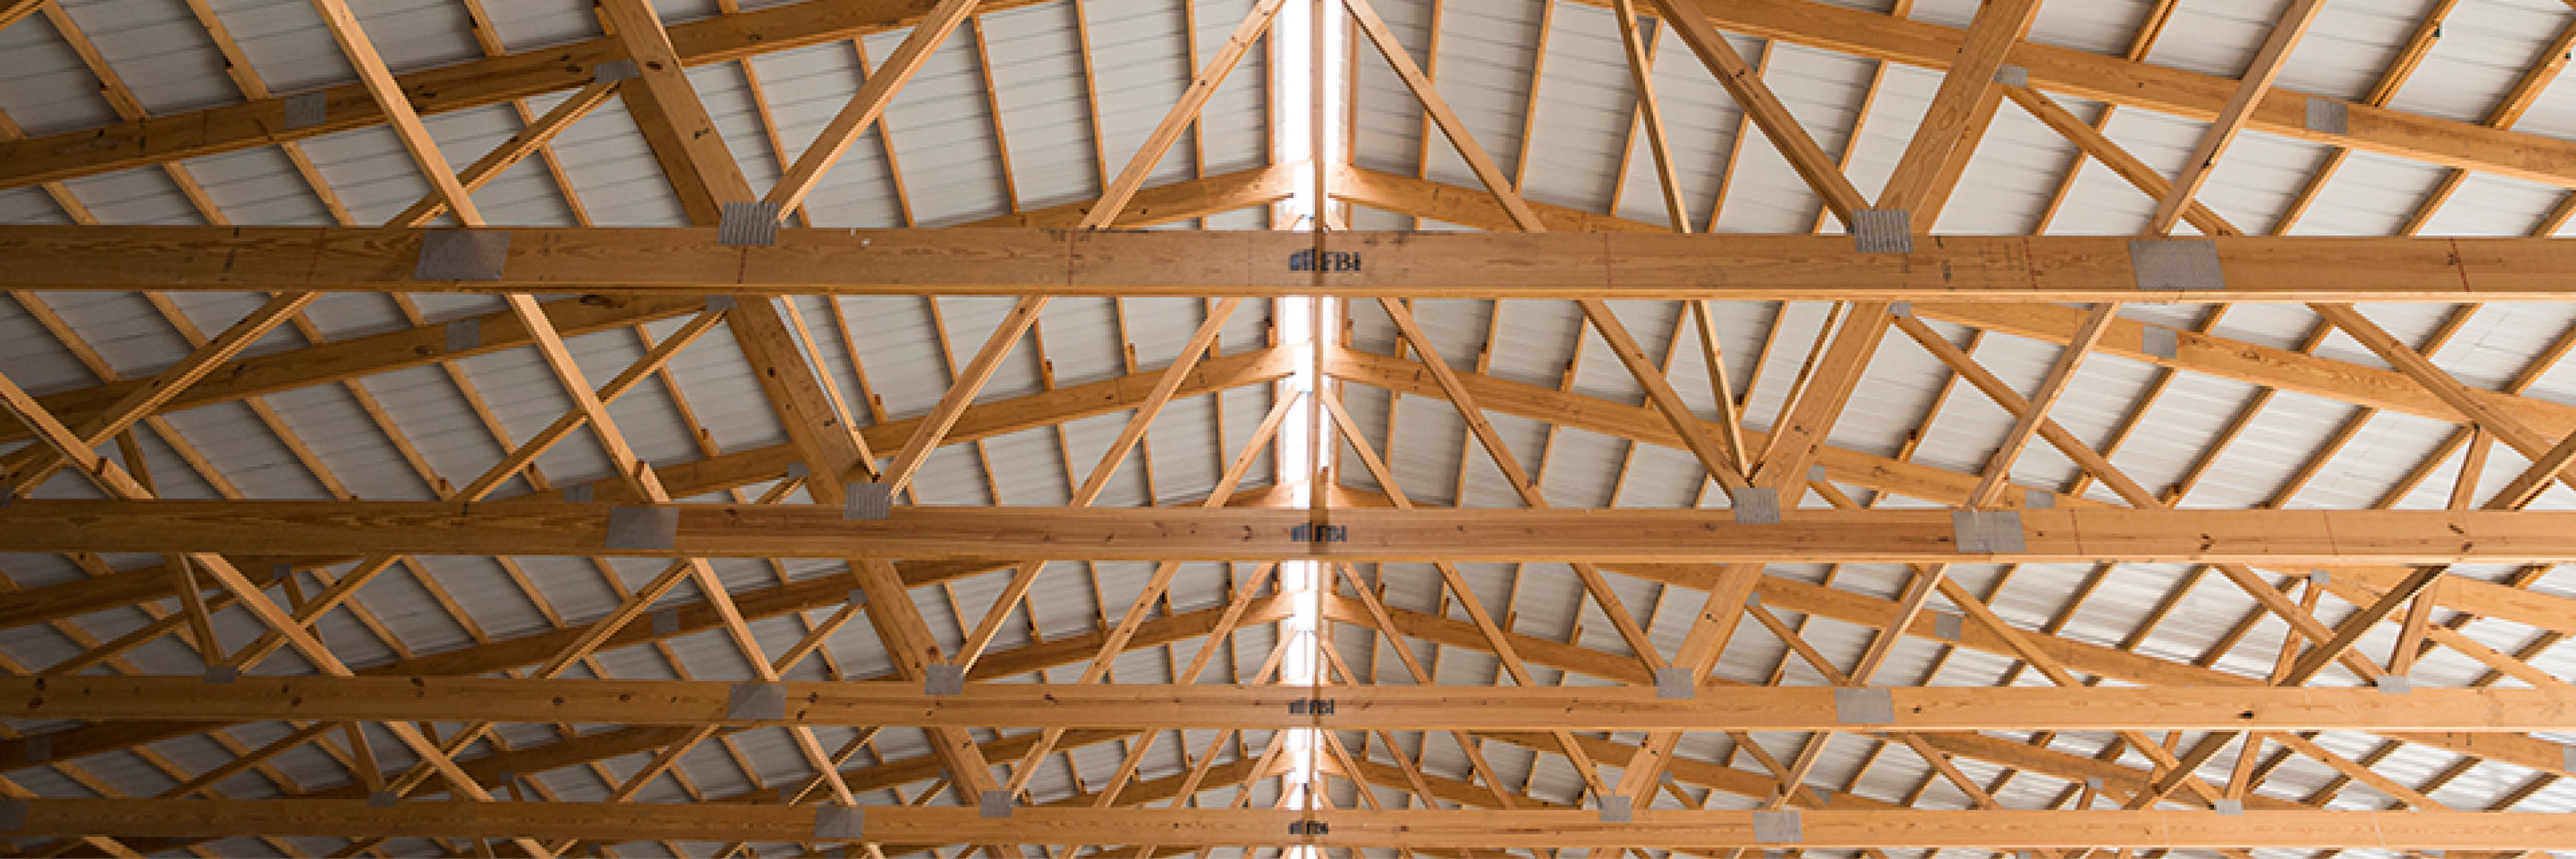 Rafters vs. Pole Barn Trusses: What’s the Difference?